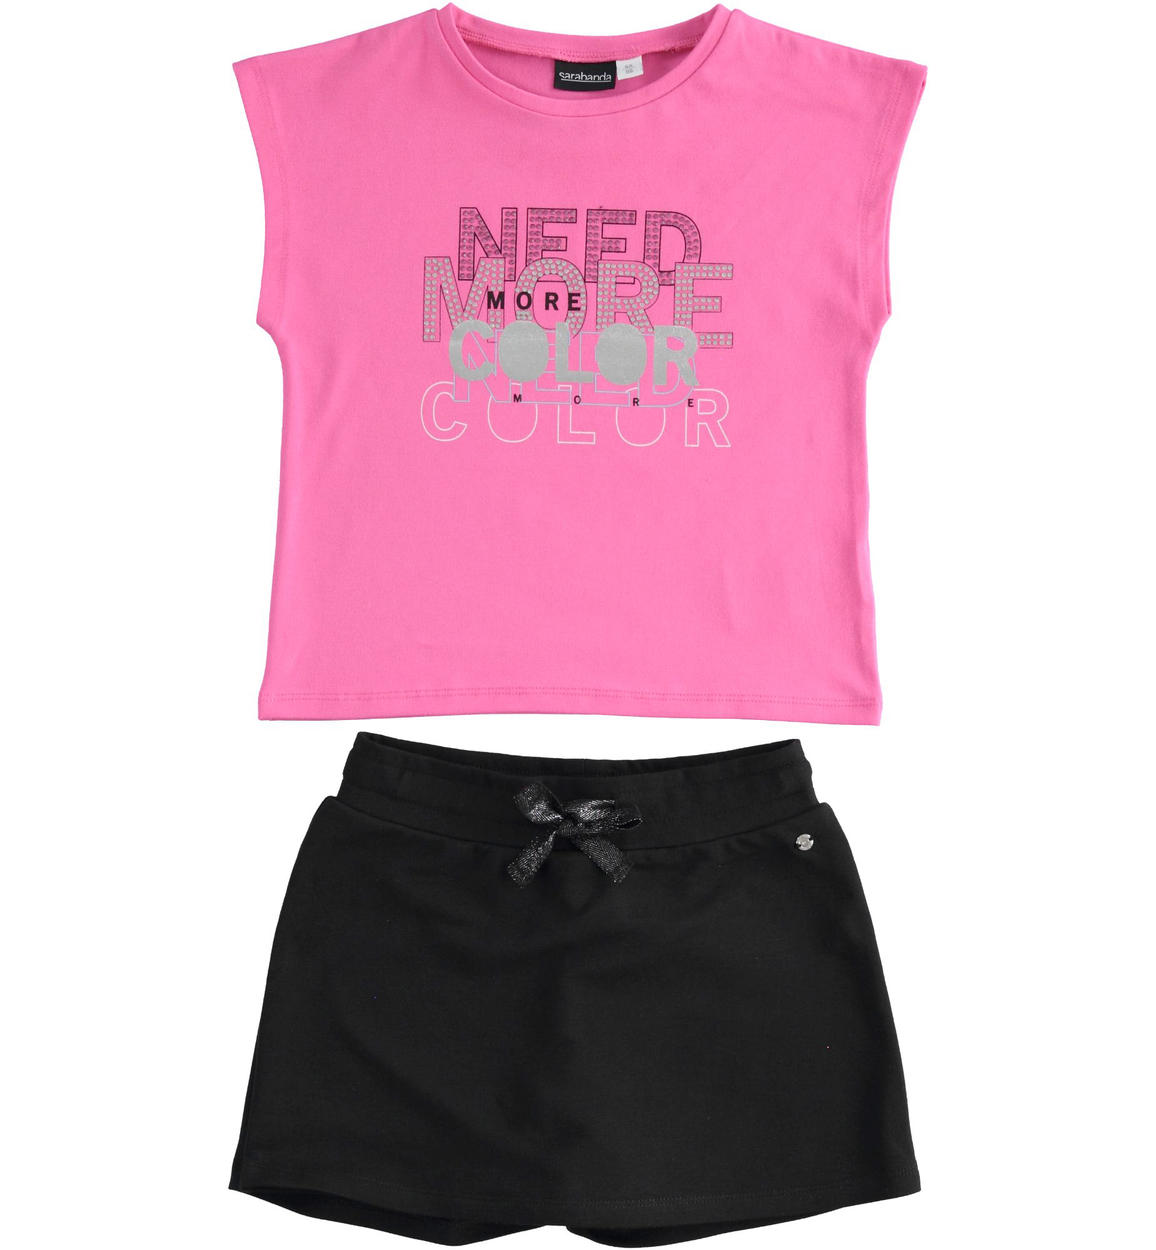 Sarabanda Stretch Cotton Outfit With T Shirt And Shorts For Girl From 6 To 16 Years Sarabanda